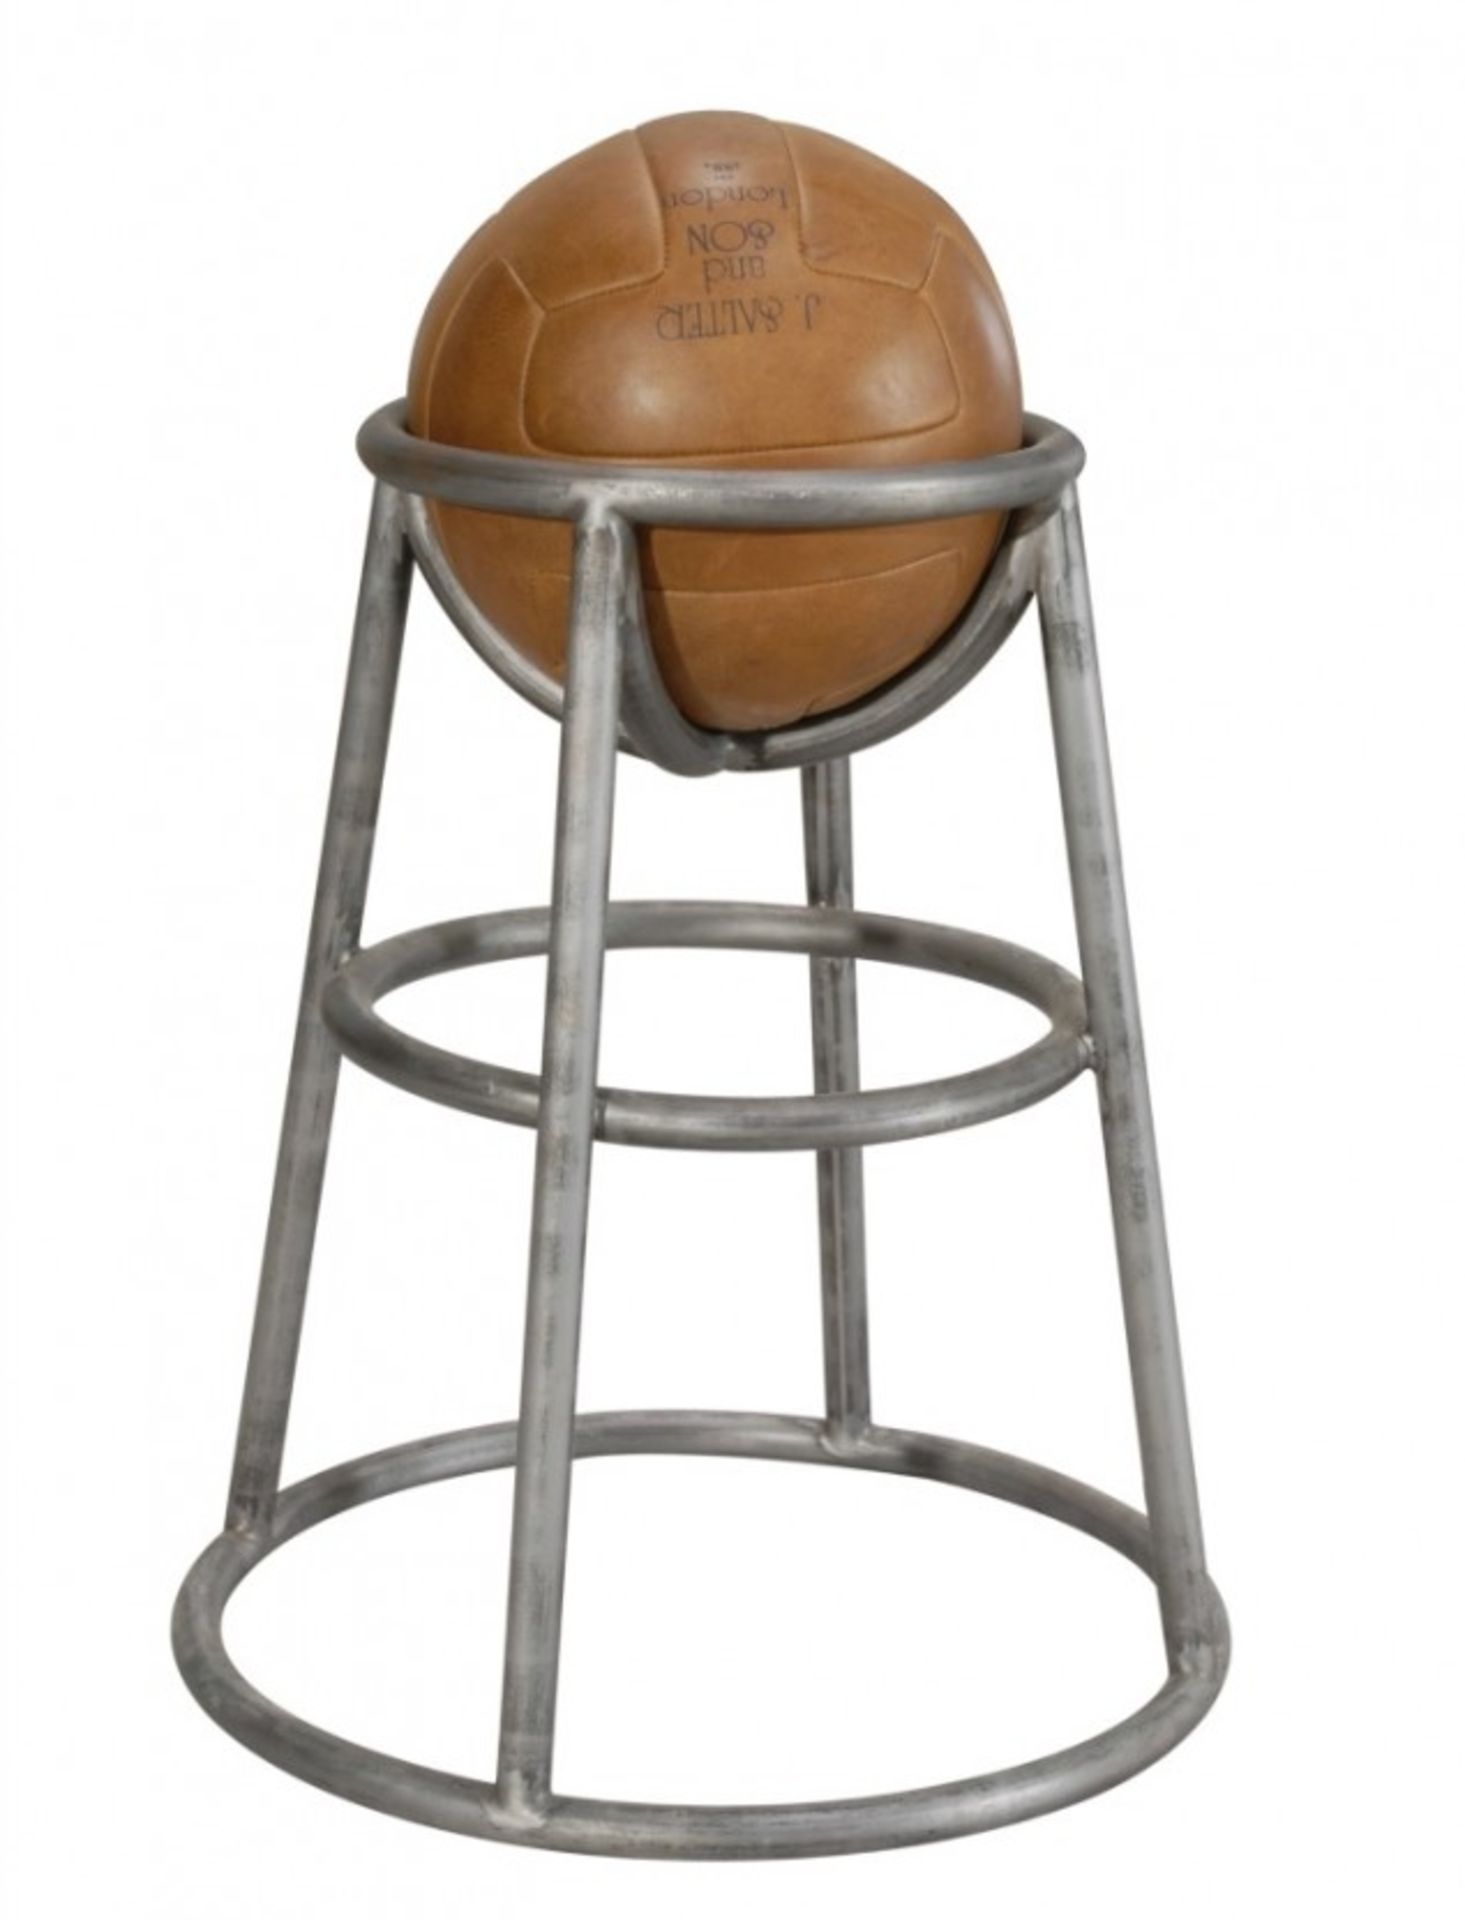 Barball 19 -This quirky Bar Ball stool with its removable leather football jauntily perched on a - Image 2 of 3